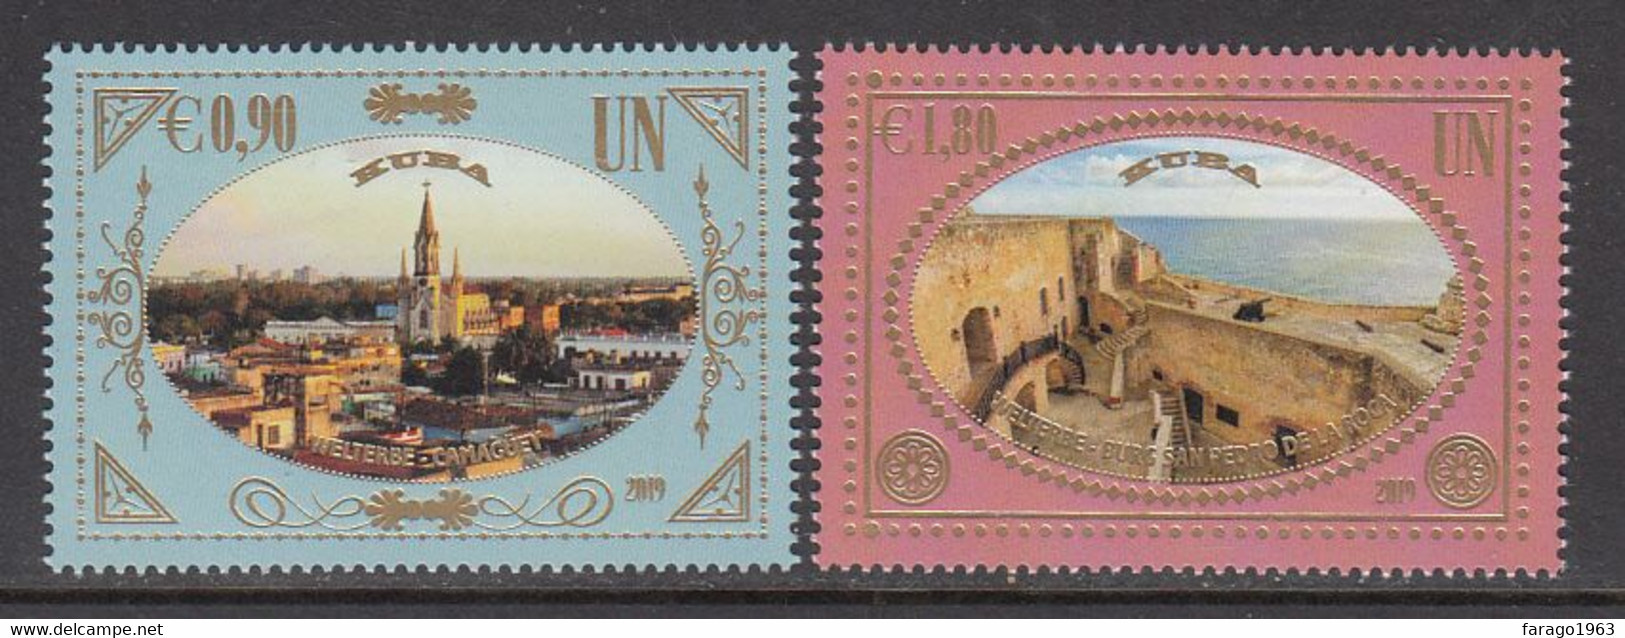 2019 United Nations Vienna World Heritage CUBA GOLD Architecture Complete Set Of 2 MNH @ BELOW FACE VALUE - Unused Stamps